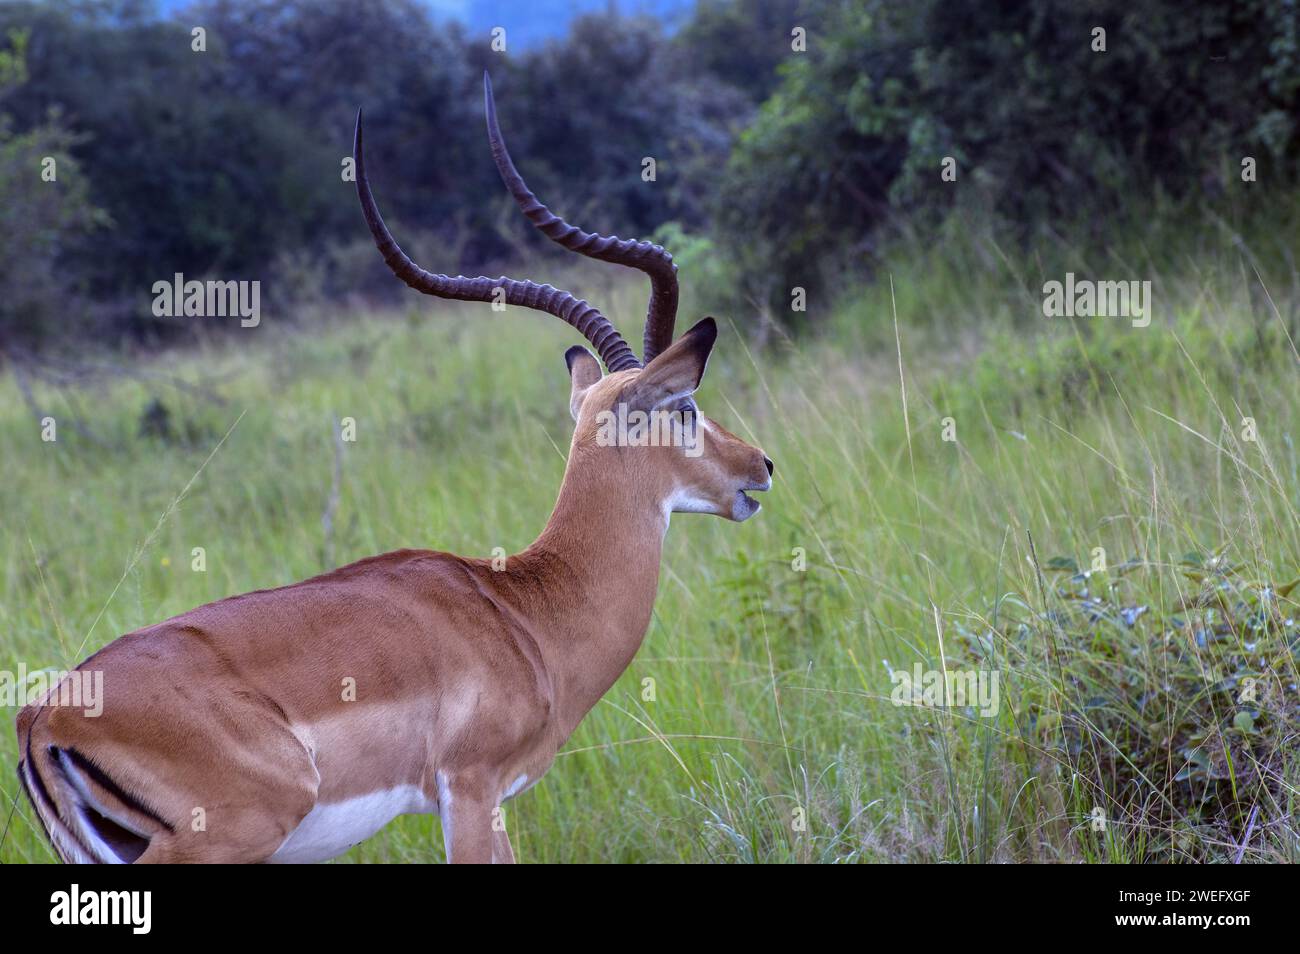 Impala photographed on safari in Akagera National Park in Northeastern Rwanda, Central Africa’s largest protected wetland. Africa Parks Stock Photo